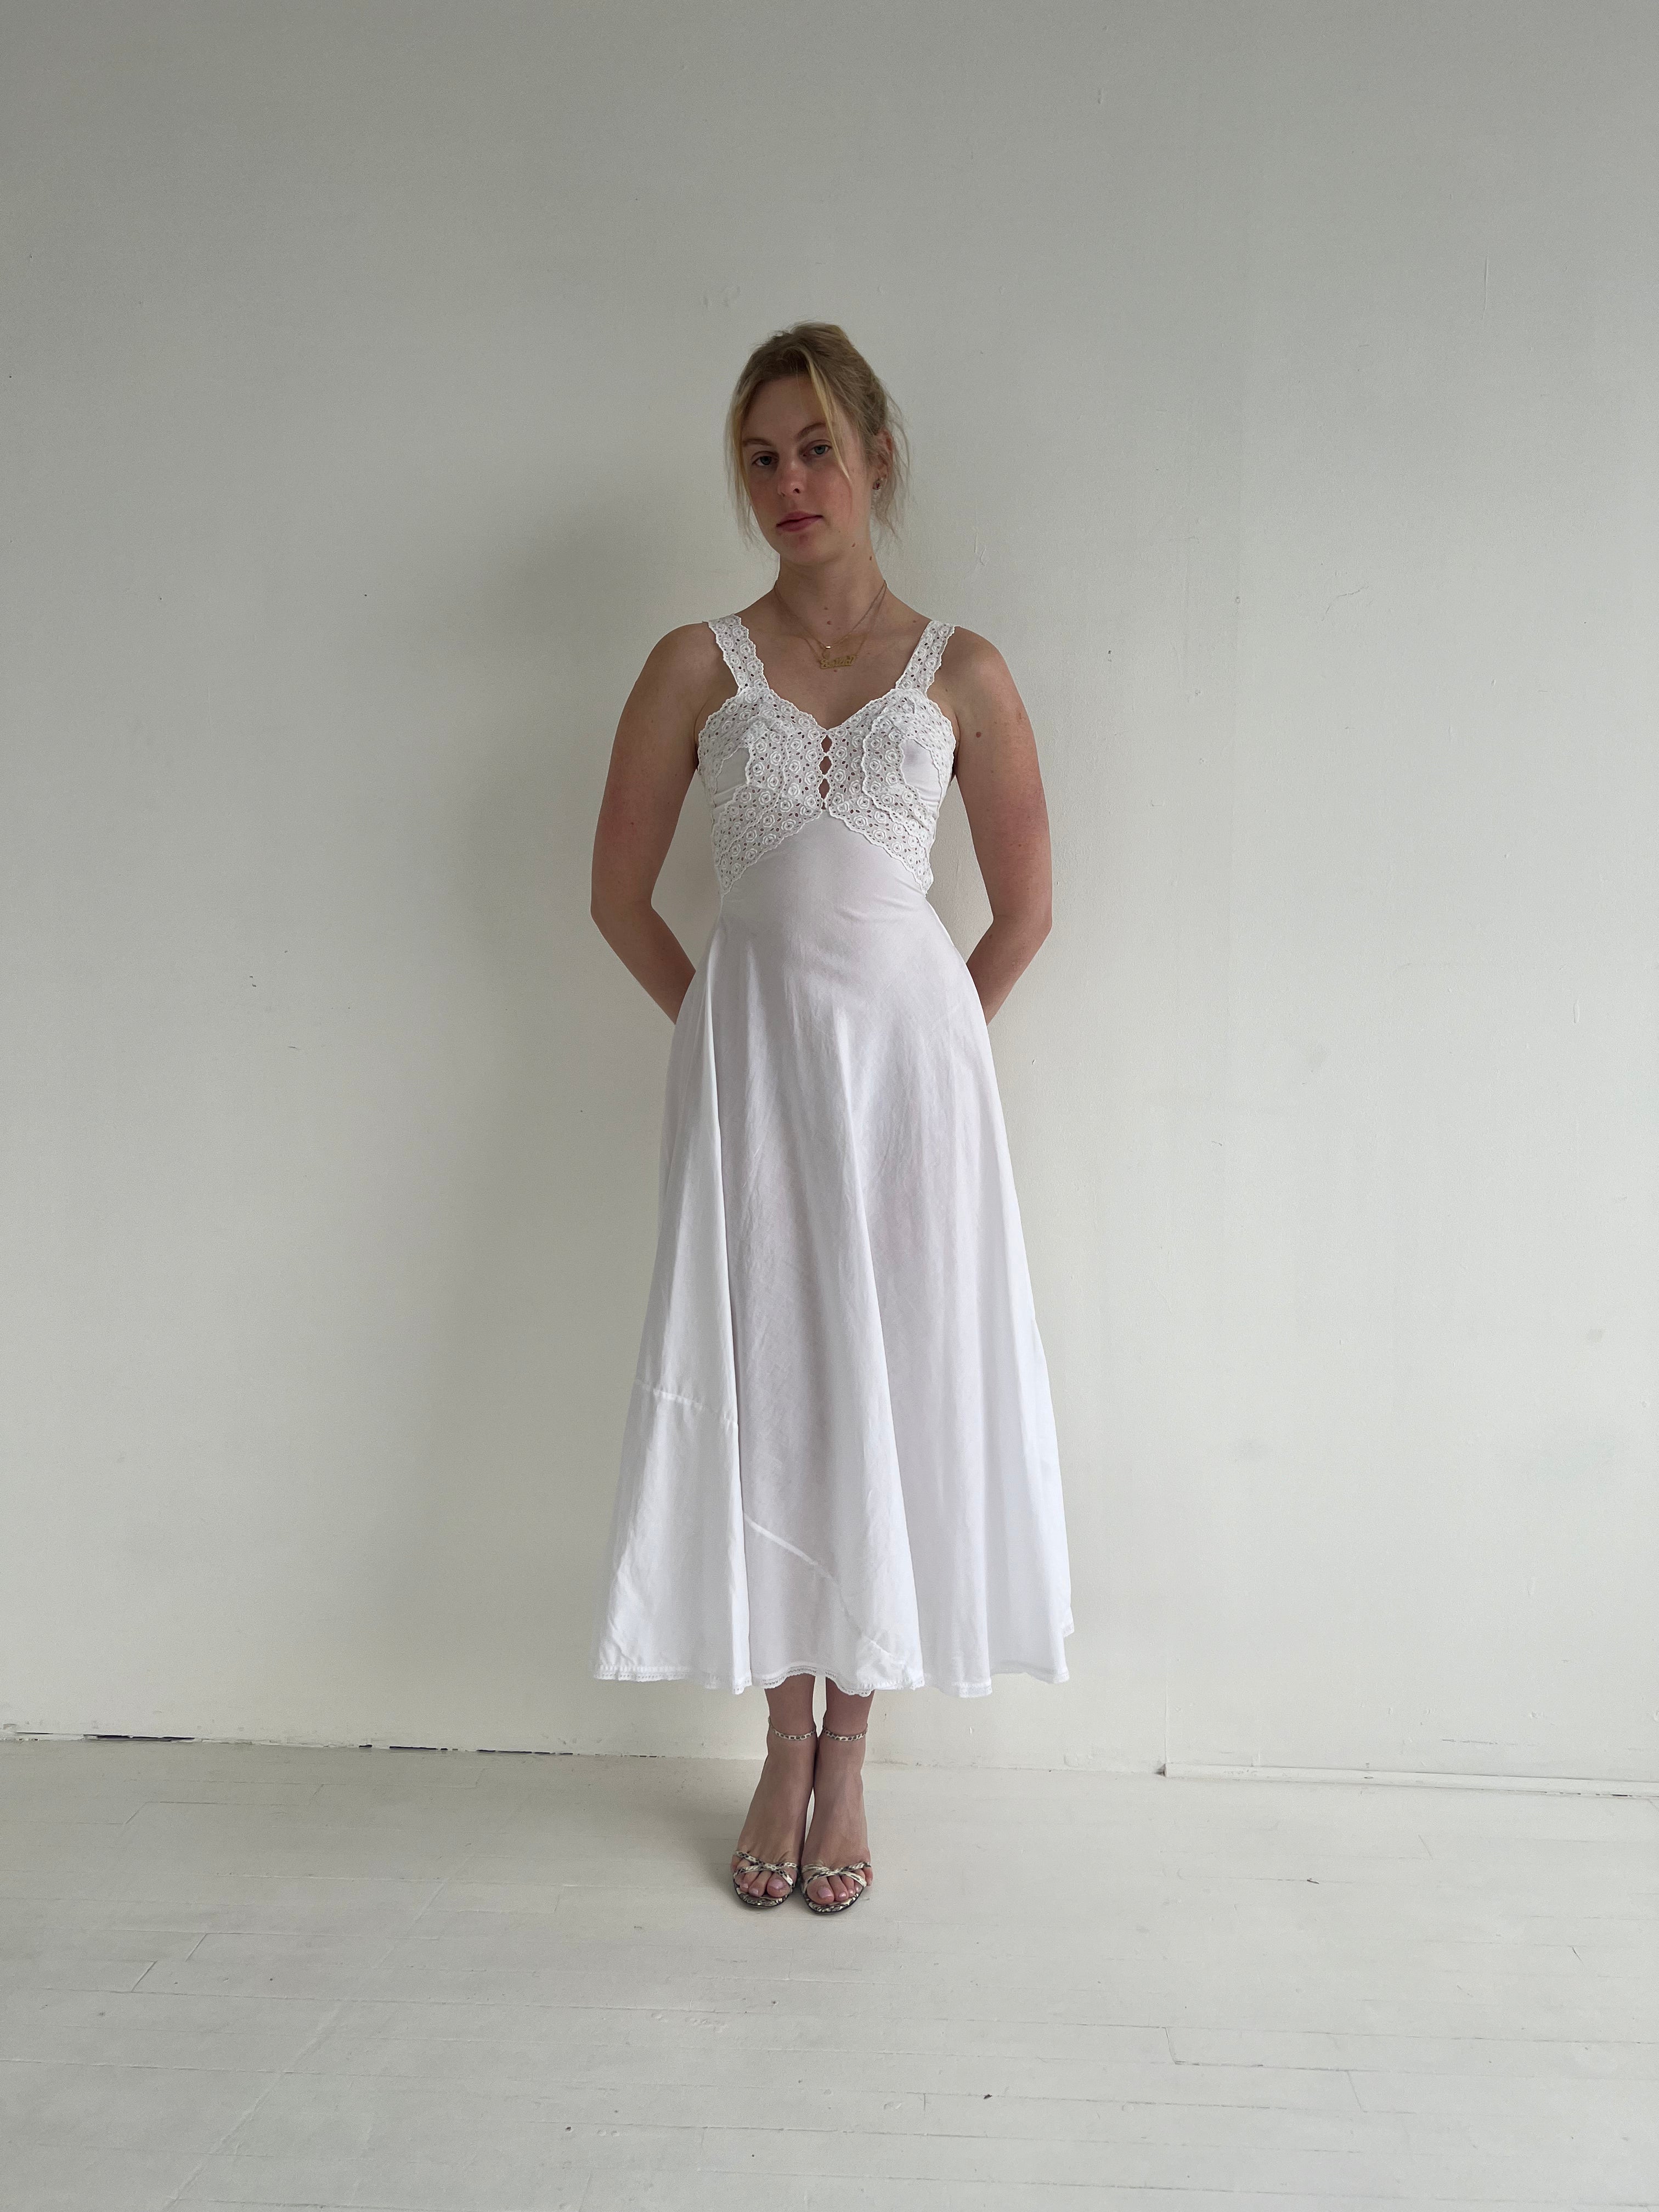 1970's Bridal White Cotton Dress with Lace